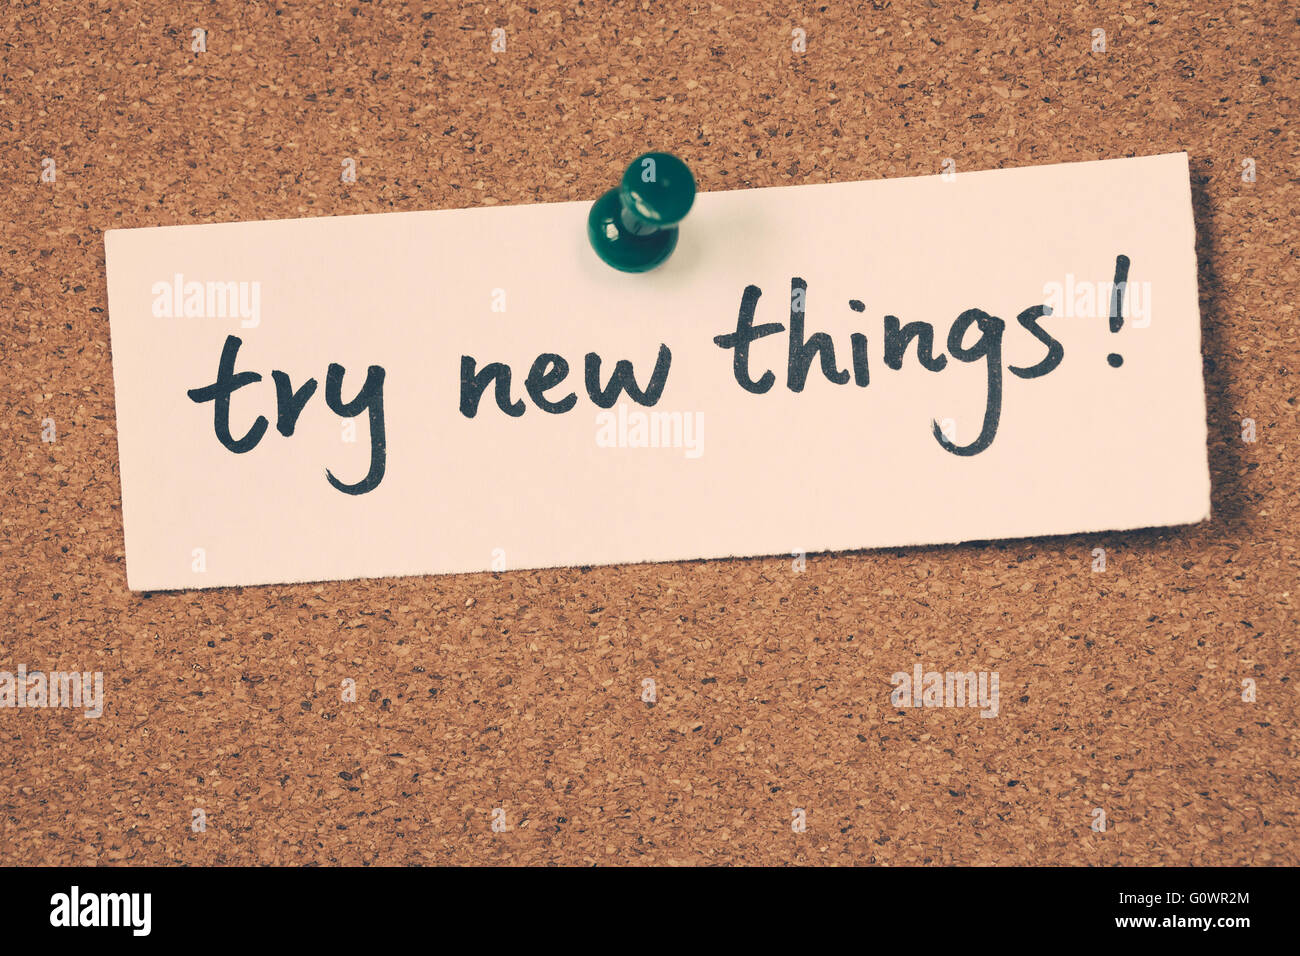 try new things Stock Photo